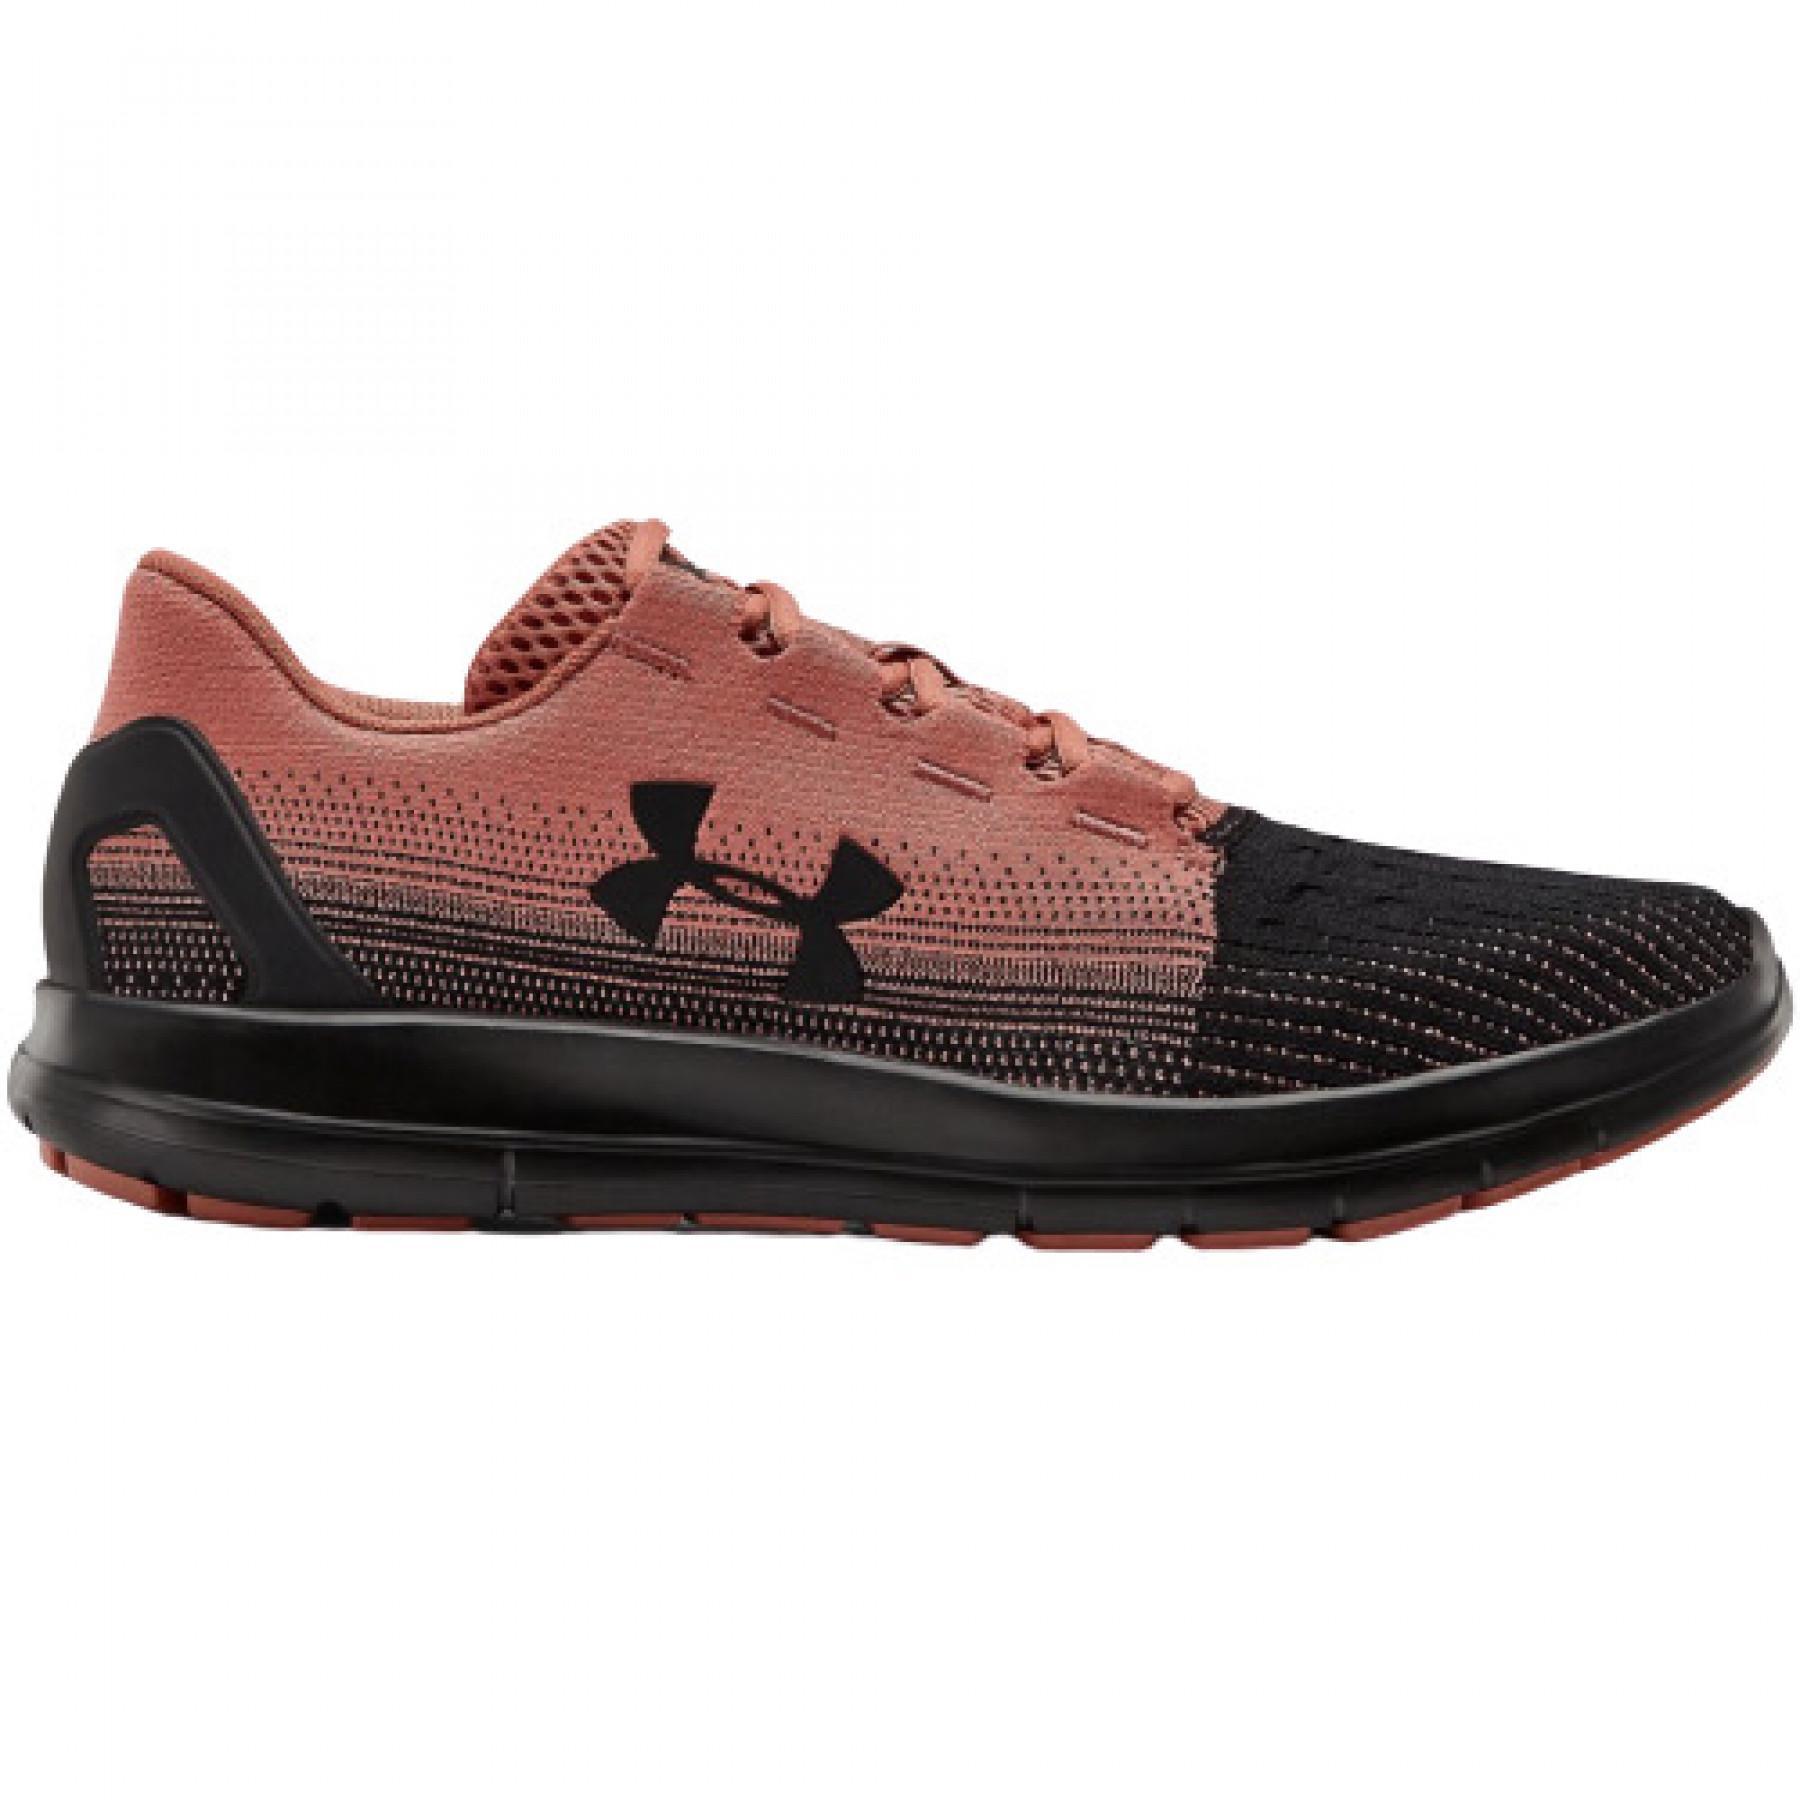 Trainers Under Armour Remix 2.0